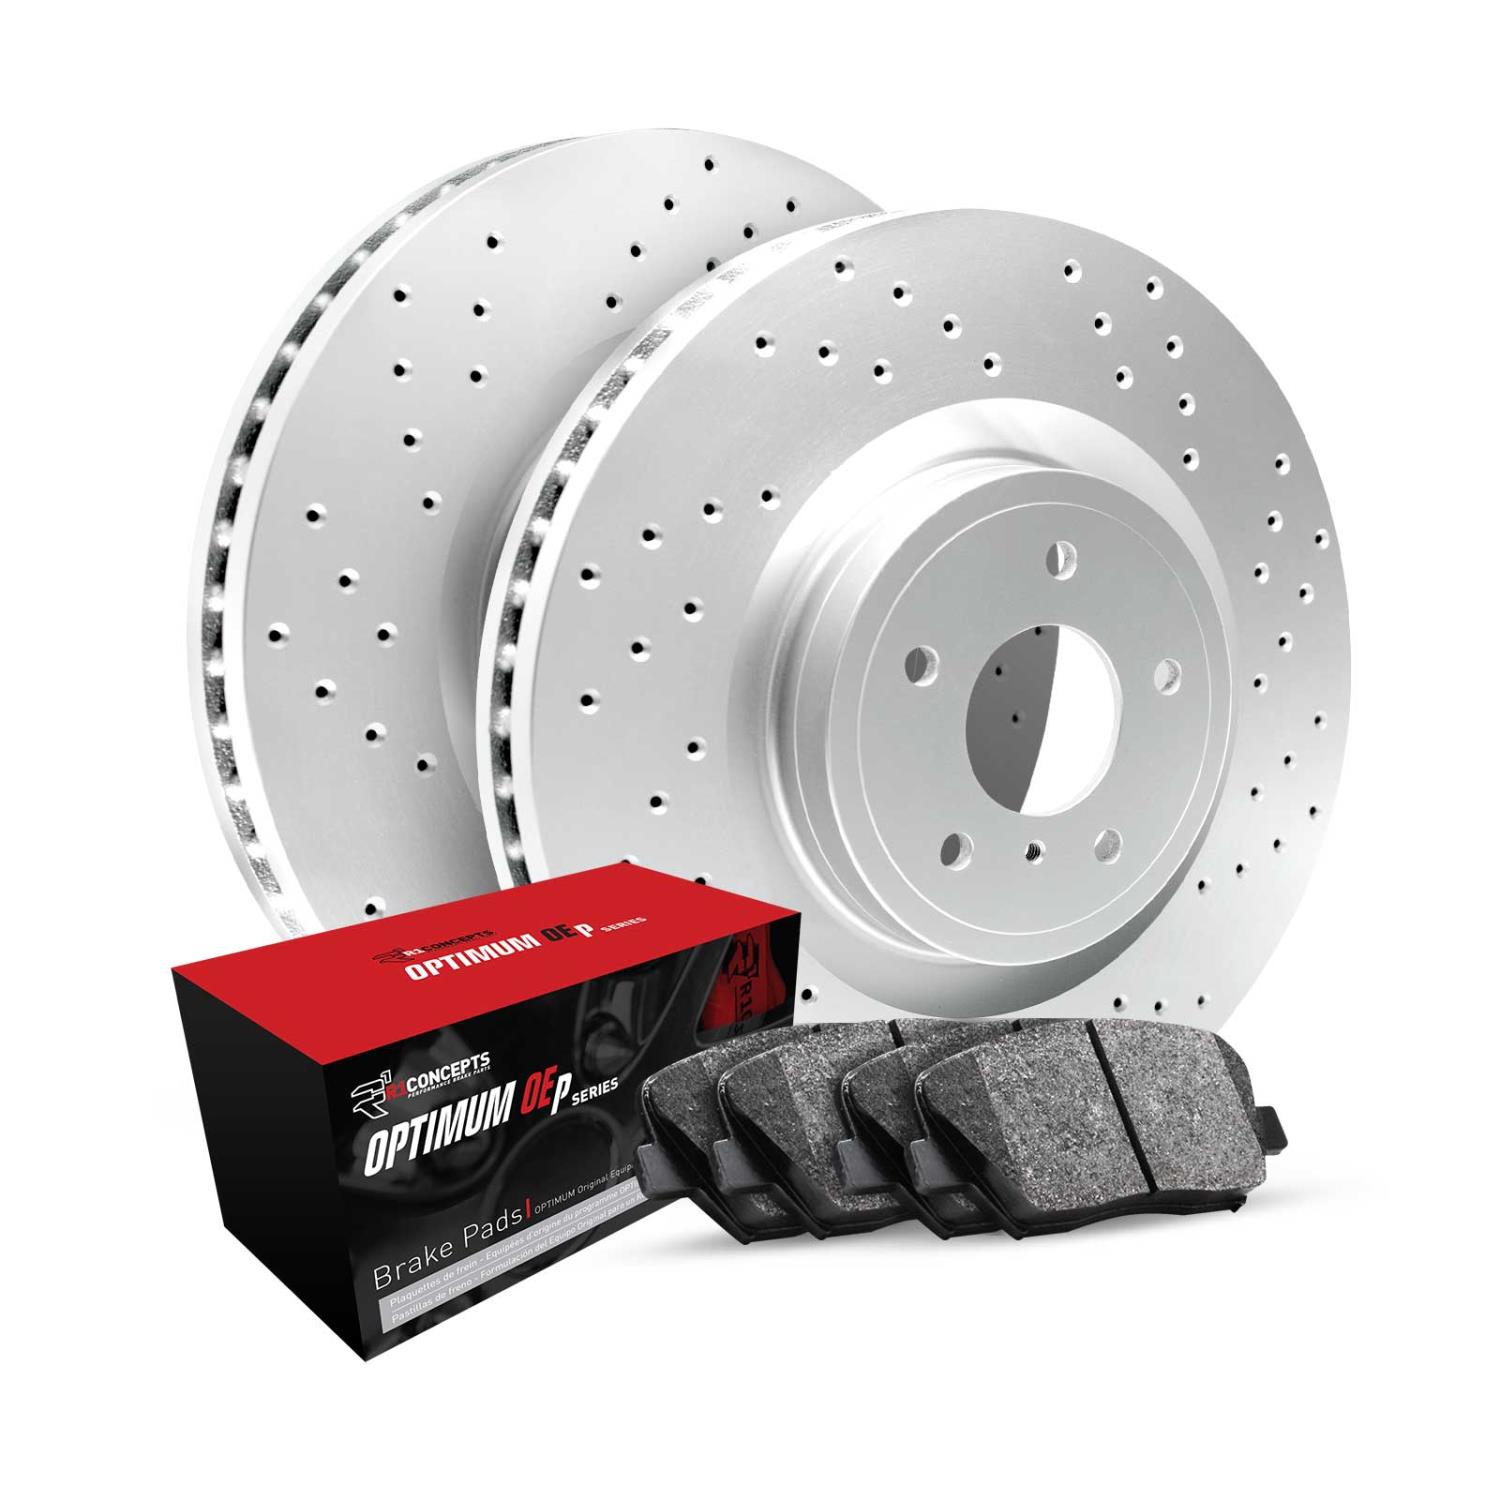 GEO-Carbon Drilled Brake Rotor Set w/Optimum OE Pads, 1990-2005 Fits Multiple Makes/Models, Position: Front